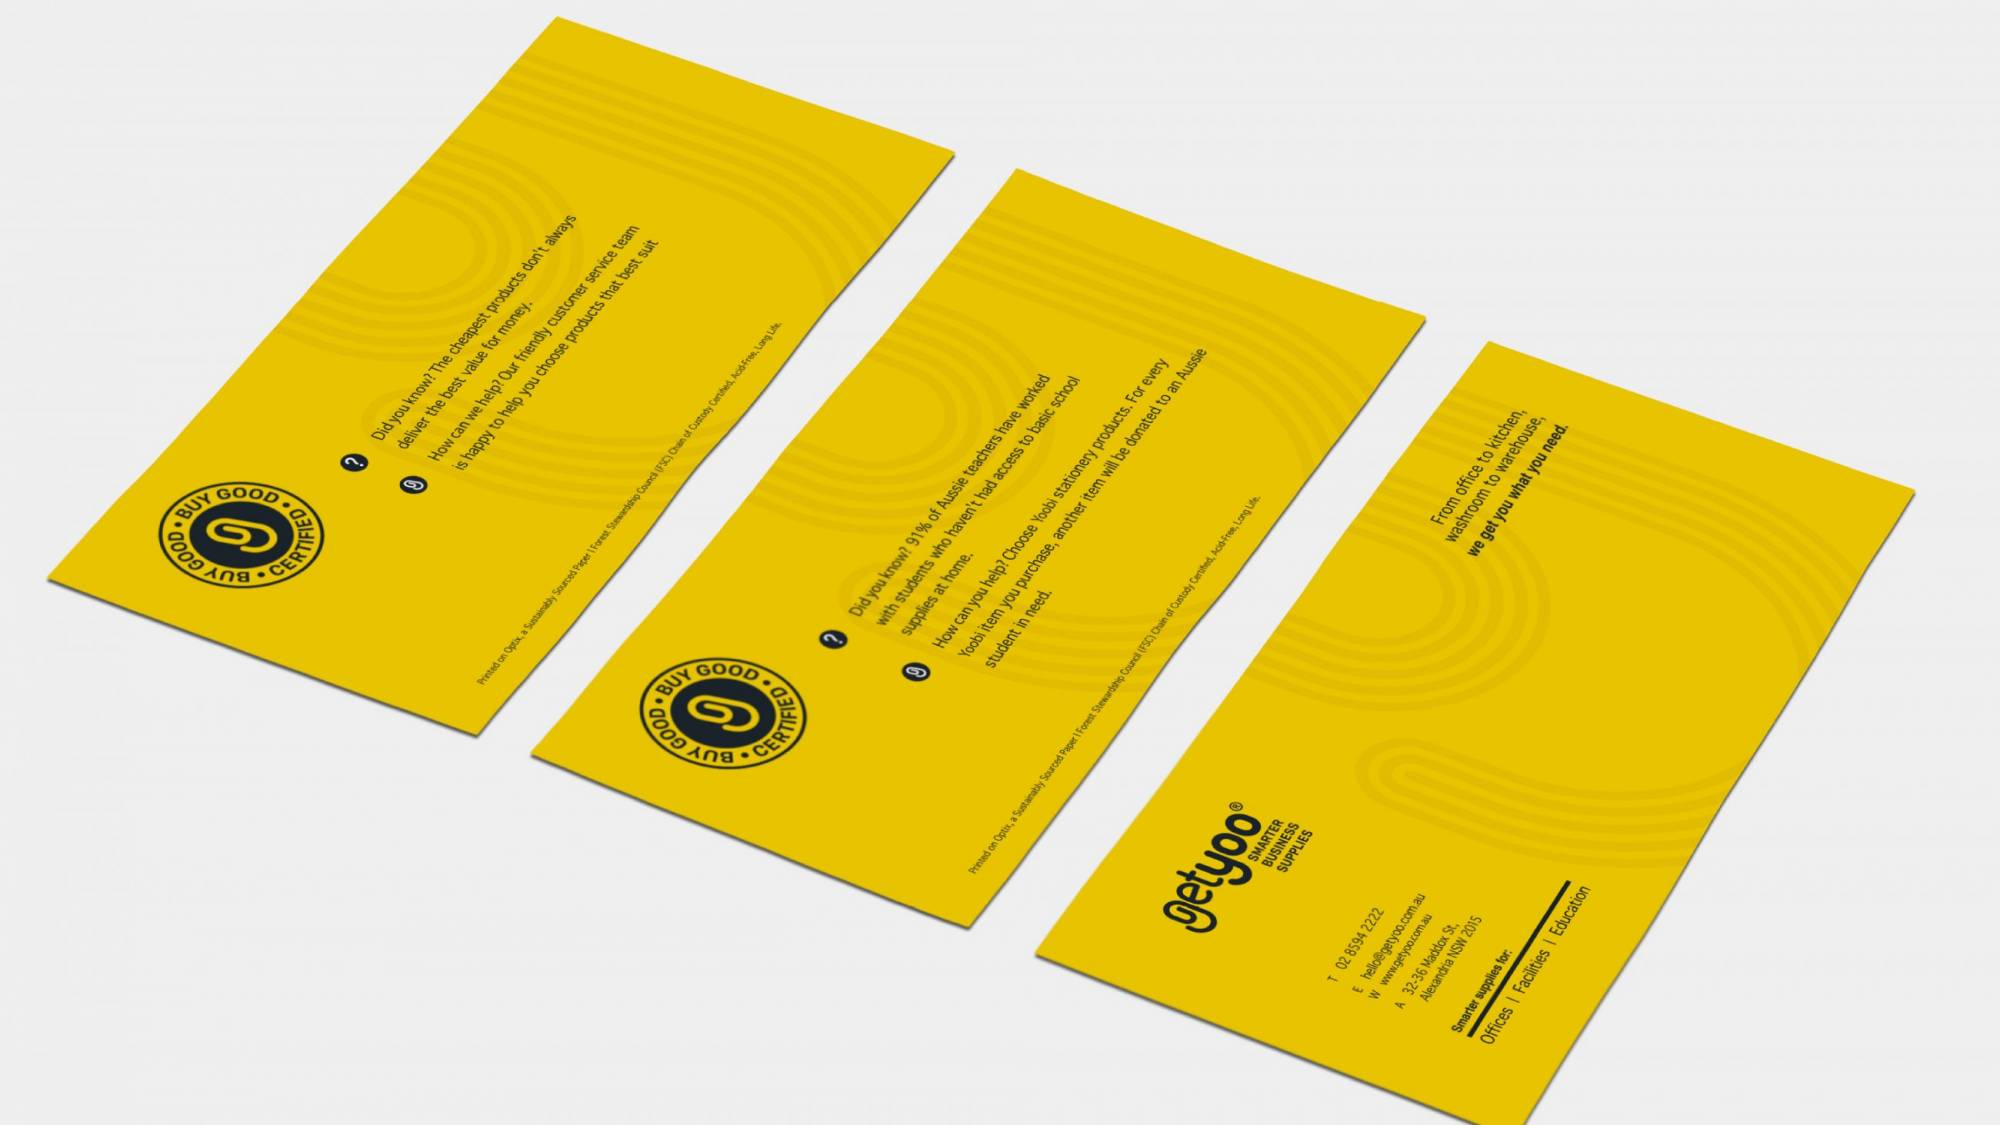 Brand identity collateral across business card design for GetYoo rebrand strategy